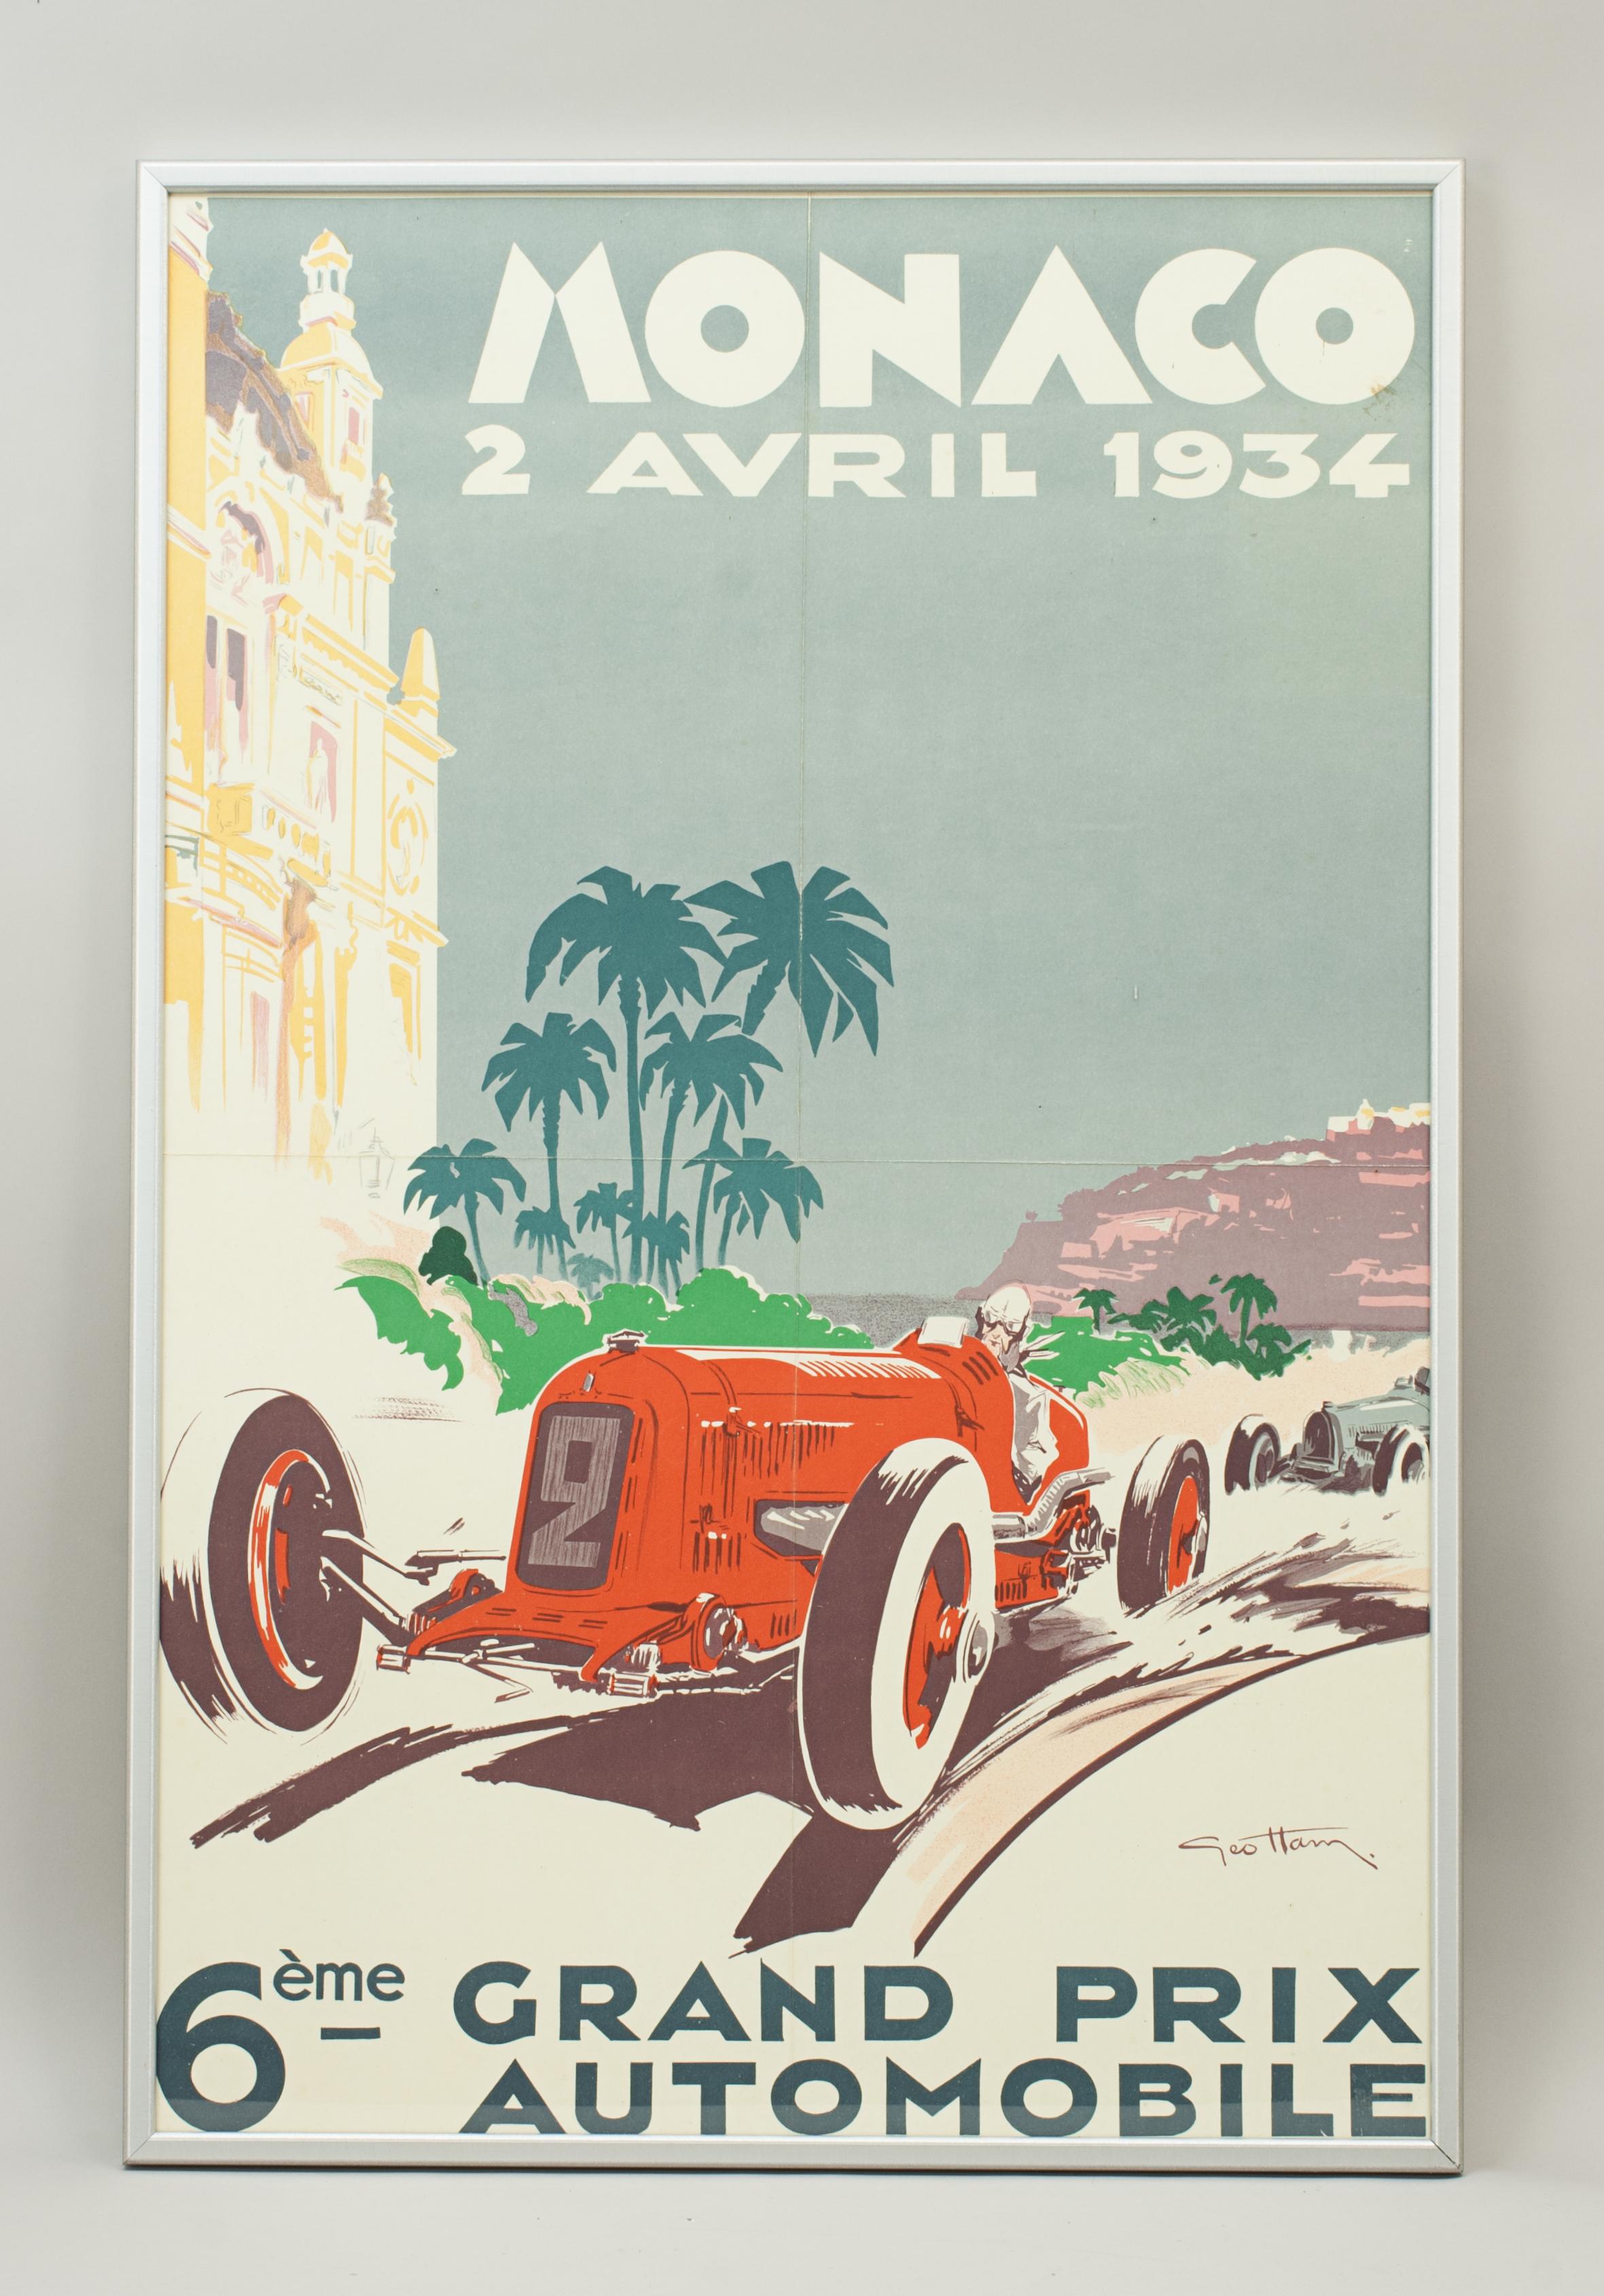 Original 1934 Monaco poster after George Hamel.

A fine rare and large original Monaco Grand Prix poster from 1934. The colors of this poster are still very rich and the condition is excellent apart from a few slight stains and fold lines down the